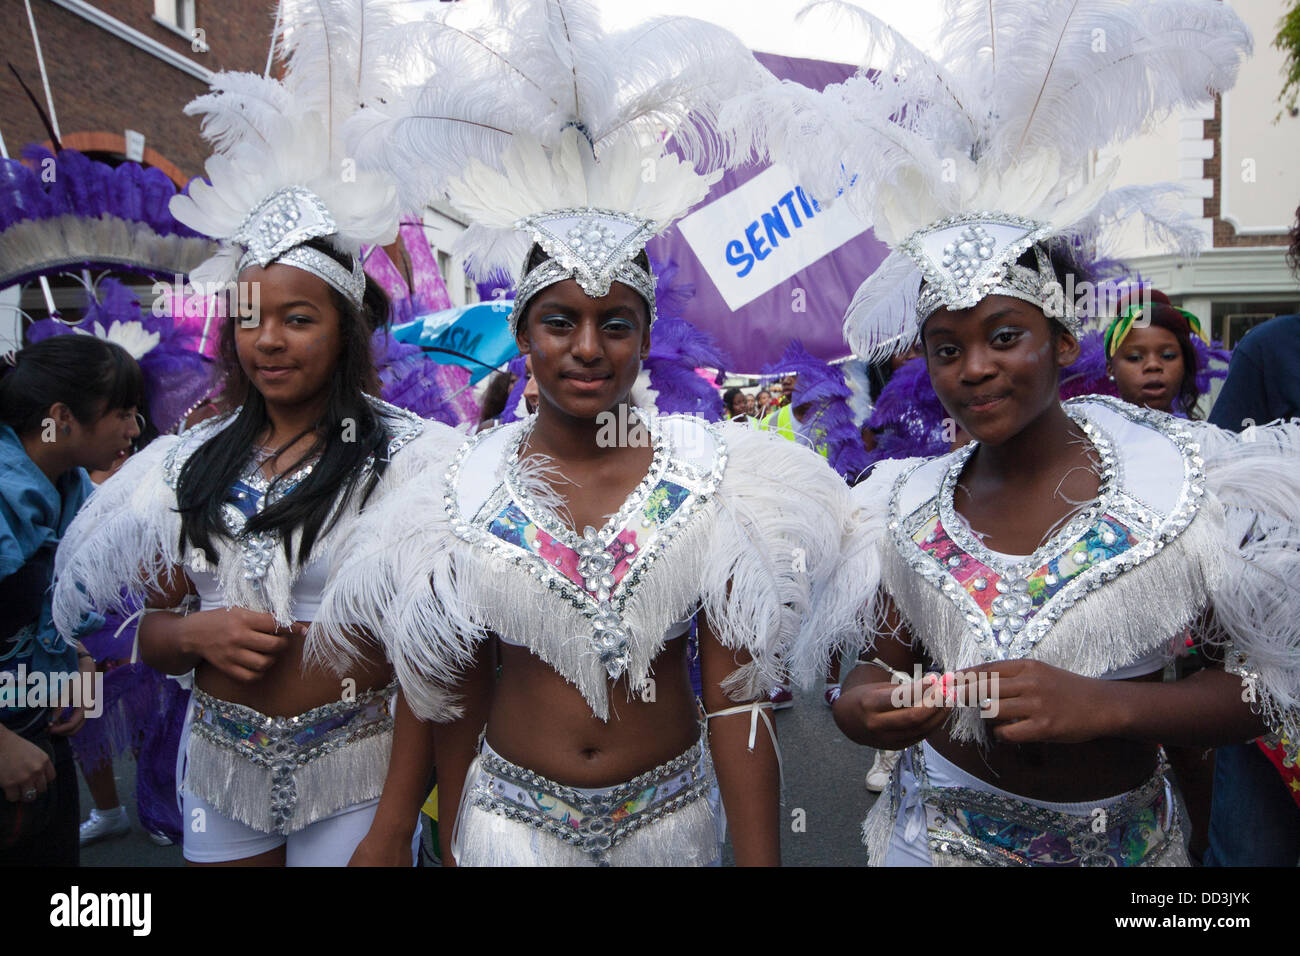 London, UK. 25th Aug, 2013. Girls march along as the annual two-day Notting Hill Carnival celebrating Afro-Carribean culture and London's ethnic diversity gets underway. Credit:  Paul Davey/Alamy Live News Stock Photo